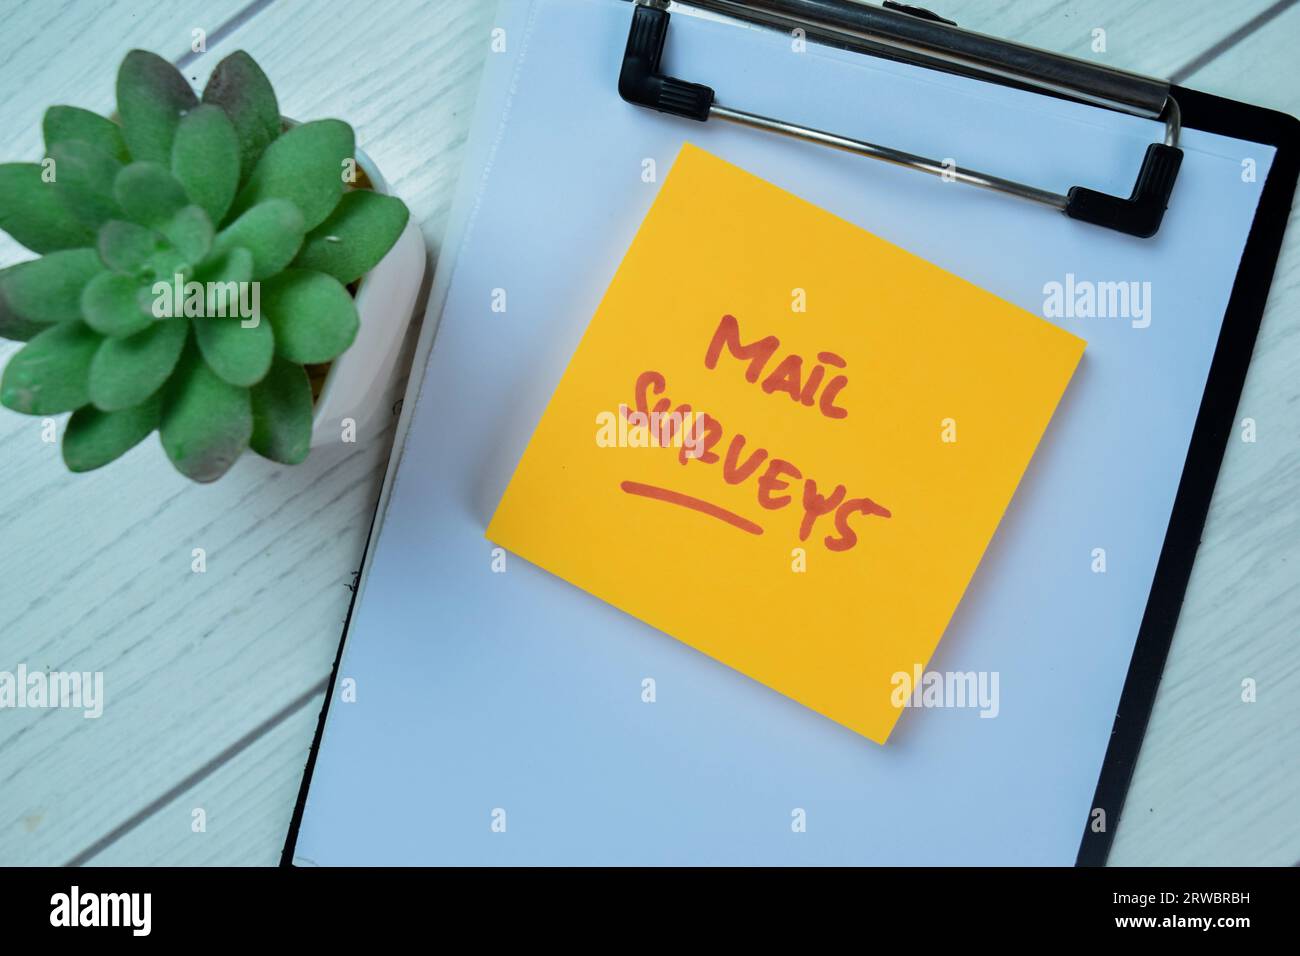 Concept of Mail Surveys write on sticky notes isolated on Wooden Table. Stock Photo